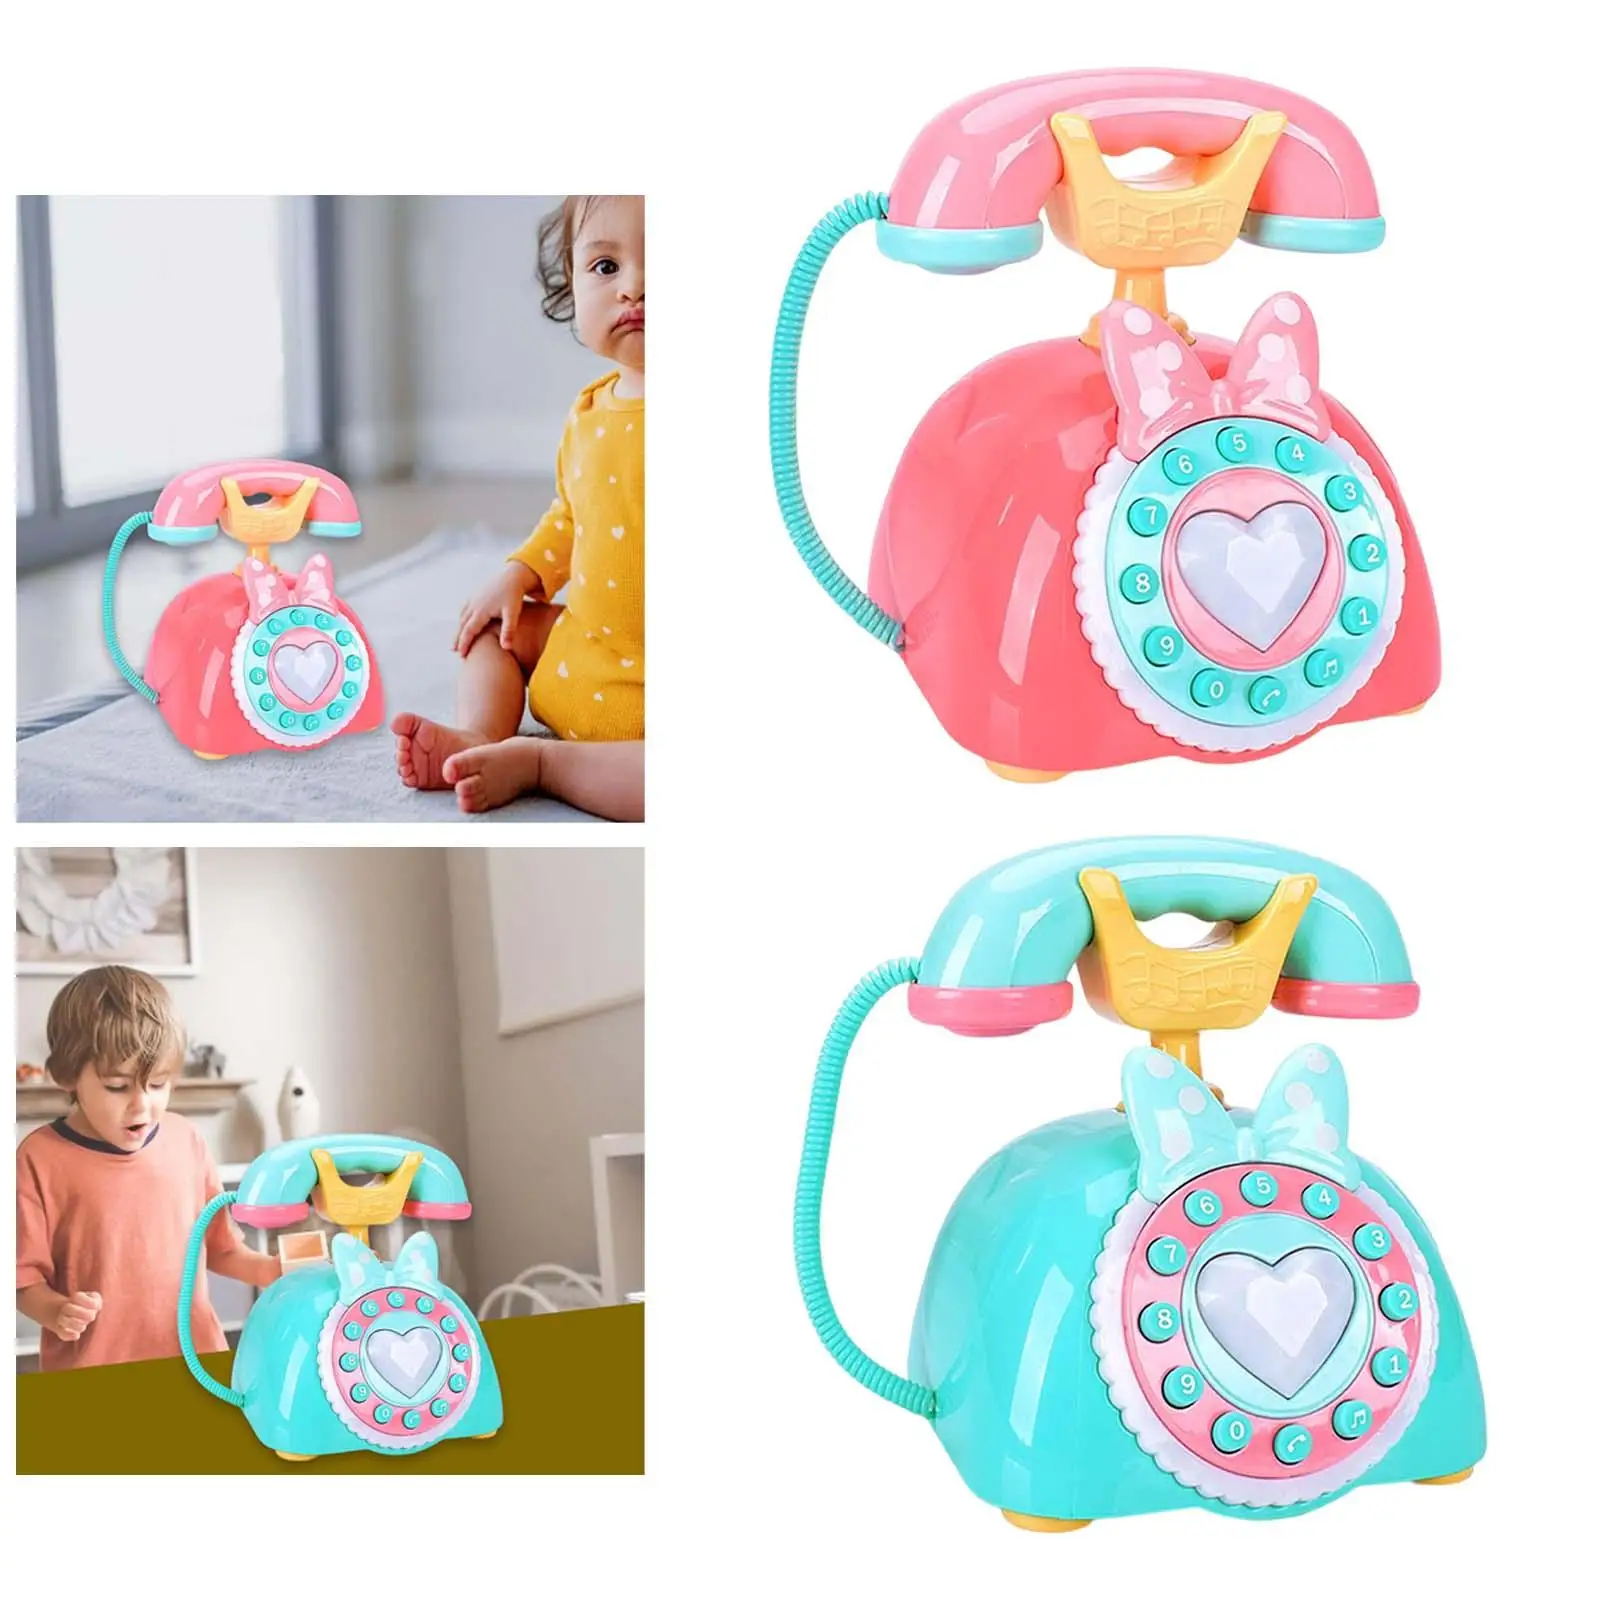 Retro Telephone Toy Gift Multifunction with Light for Preschool Pretend Play